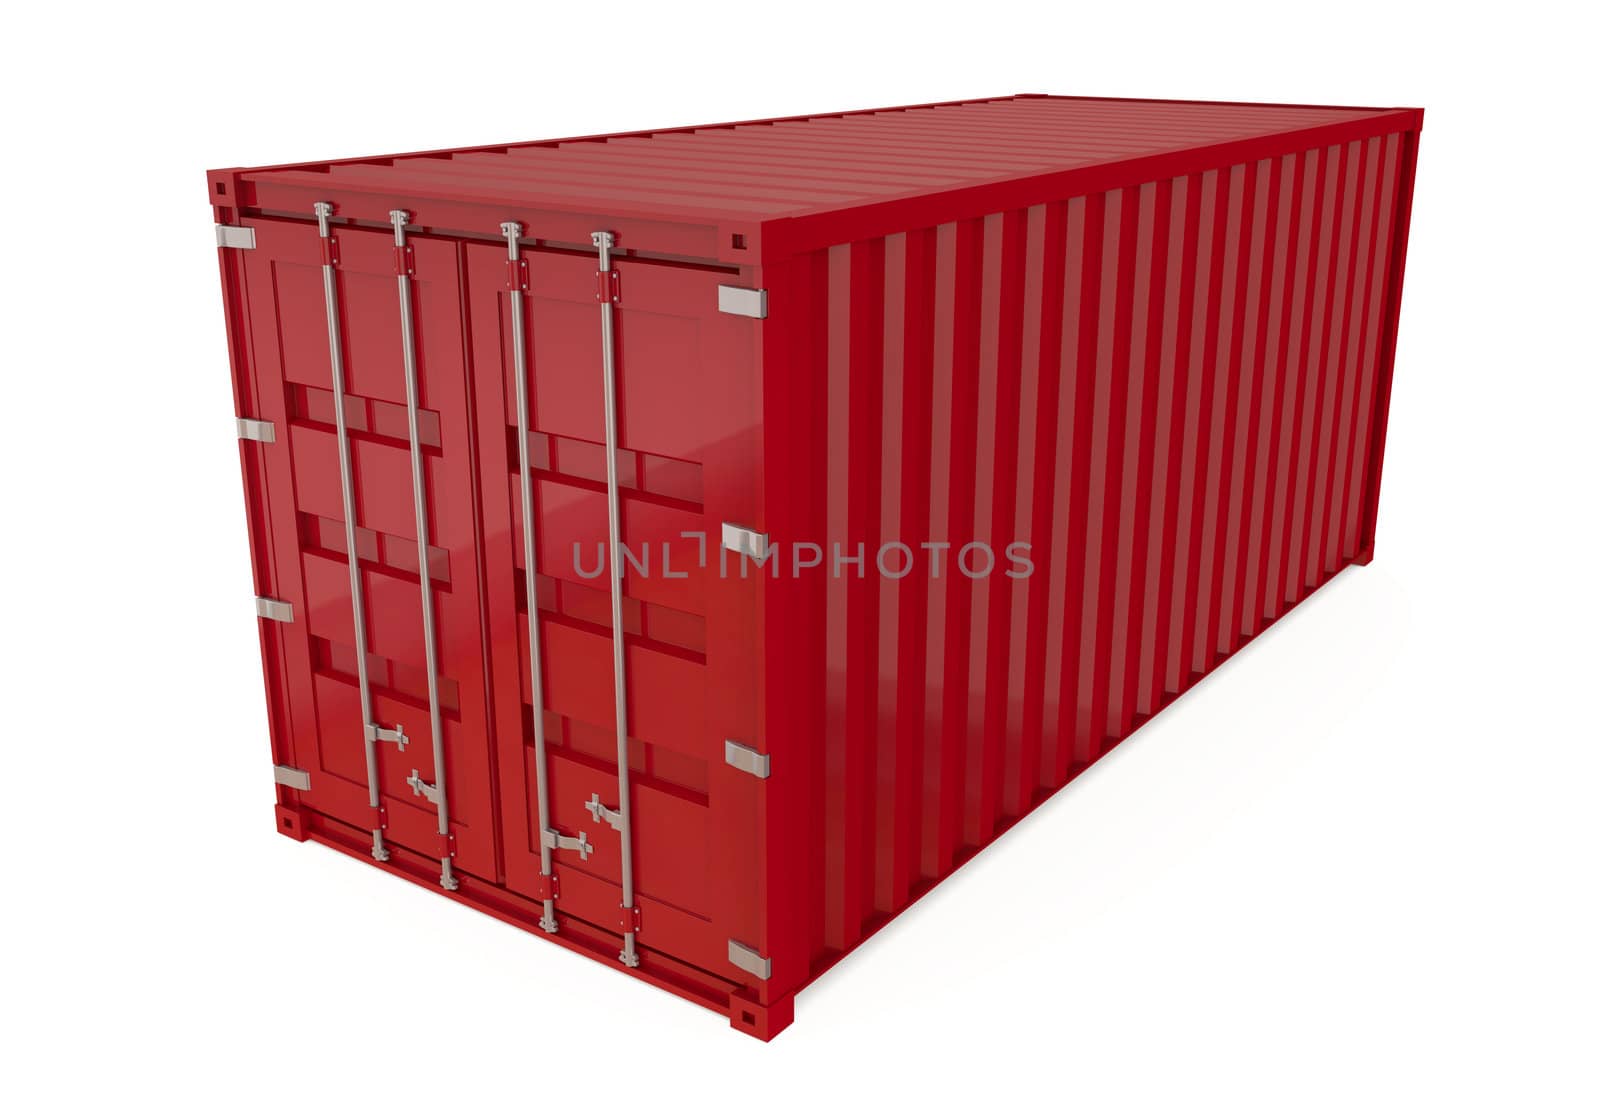 Red shipping container isolated on white. 3D render.